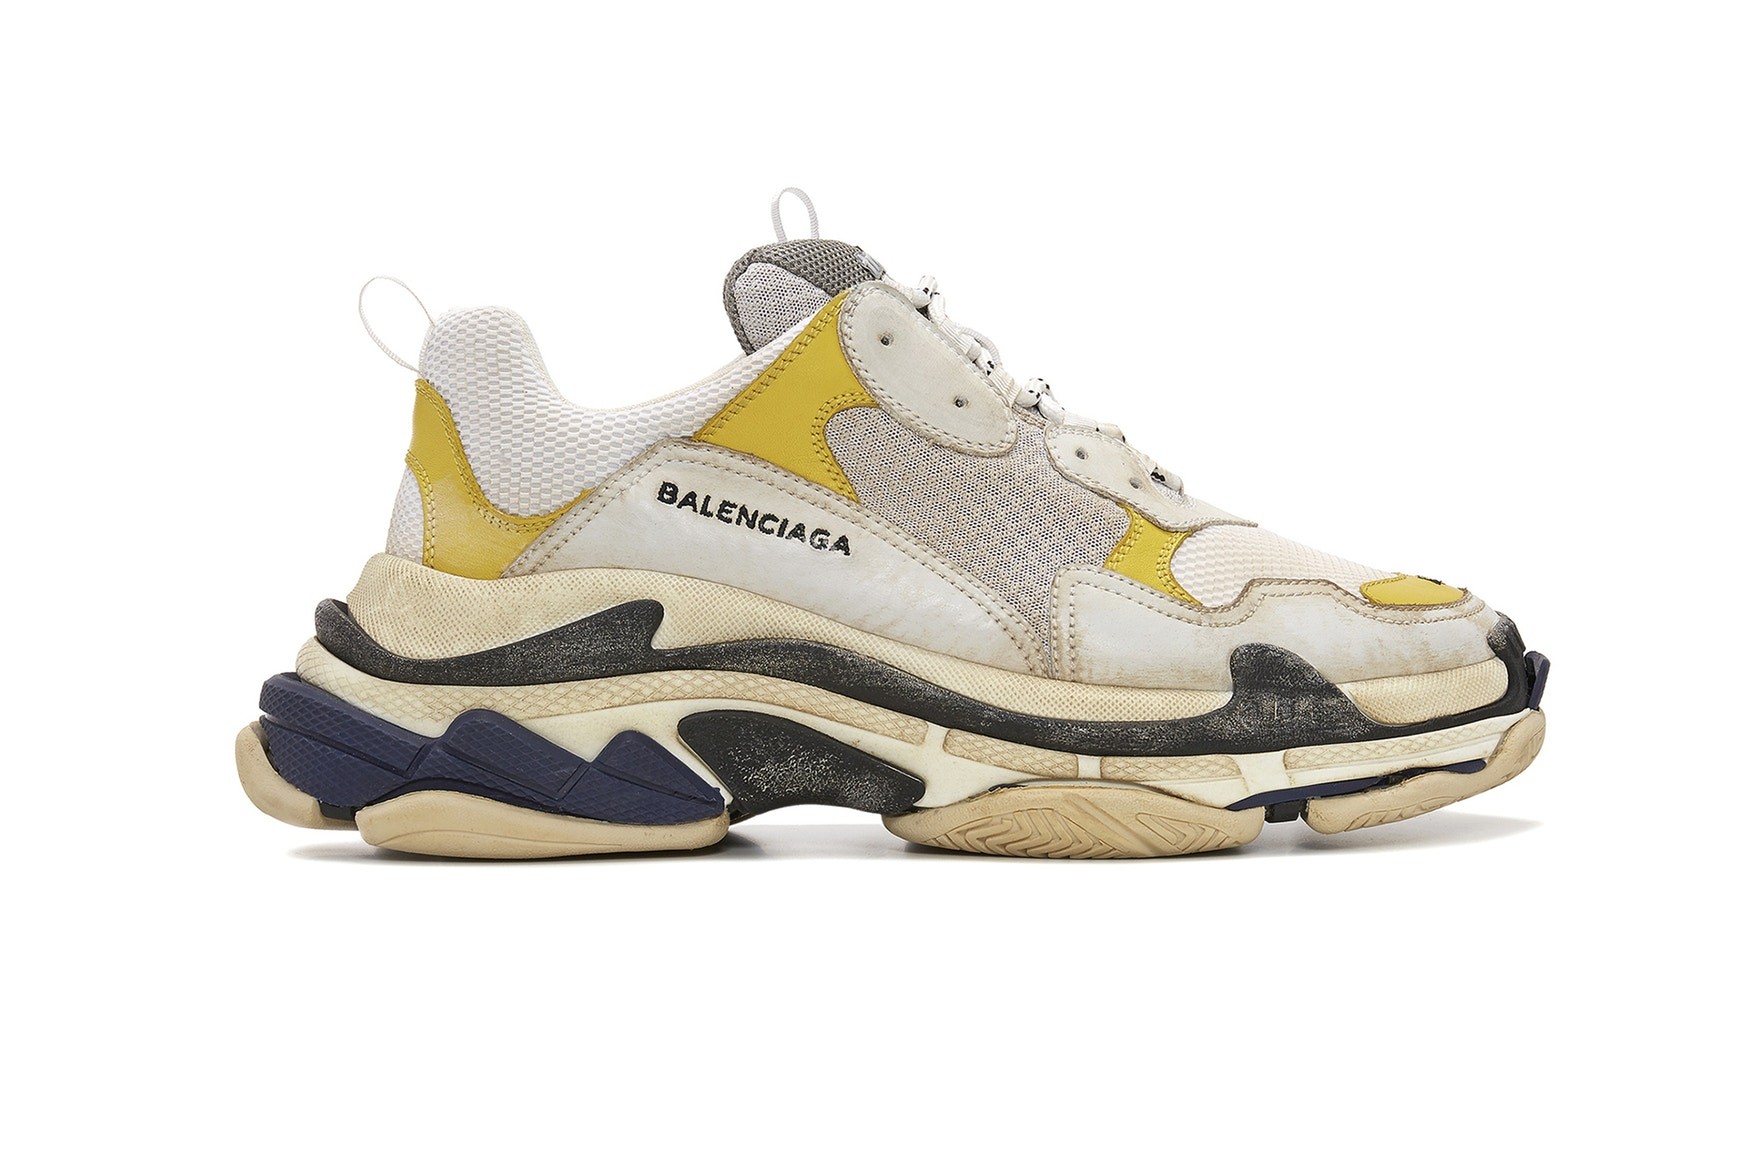 Balenciaga teams up with Dover Street Market on exclusive Triple S colorway South China Morning Post